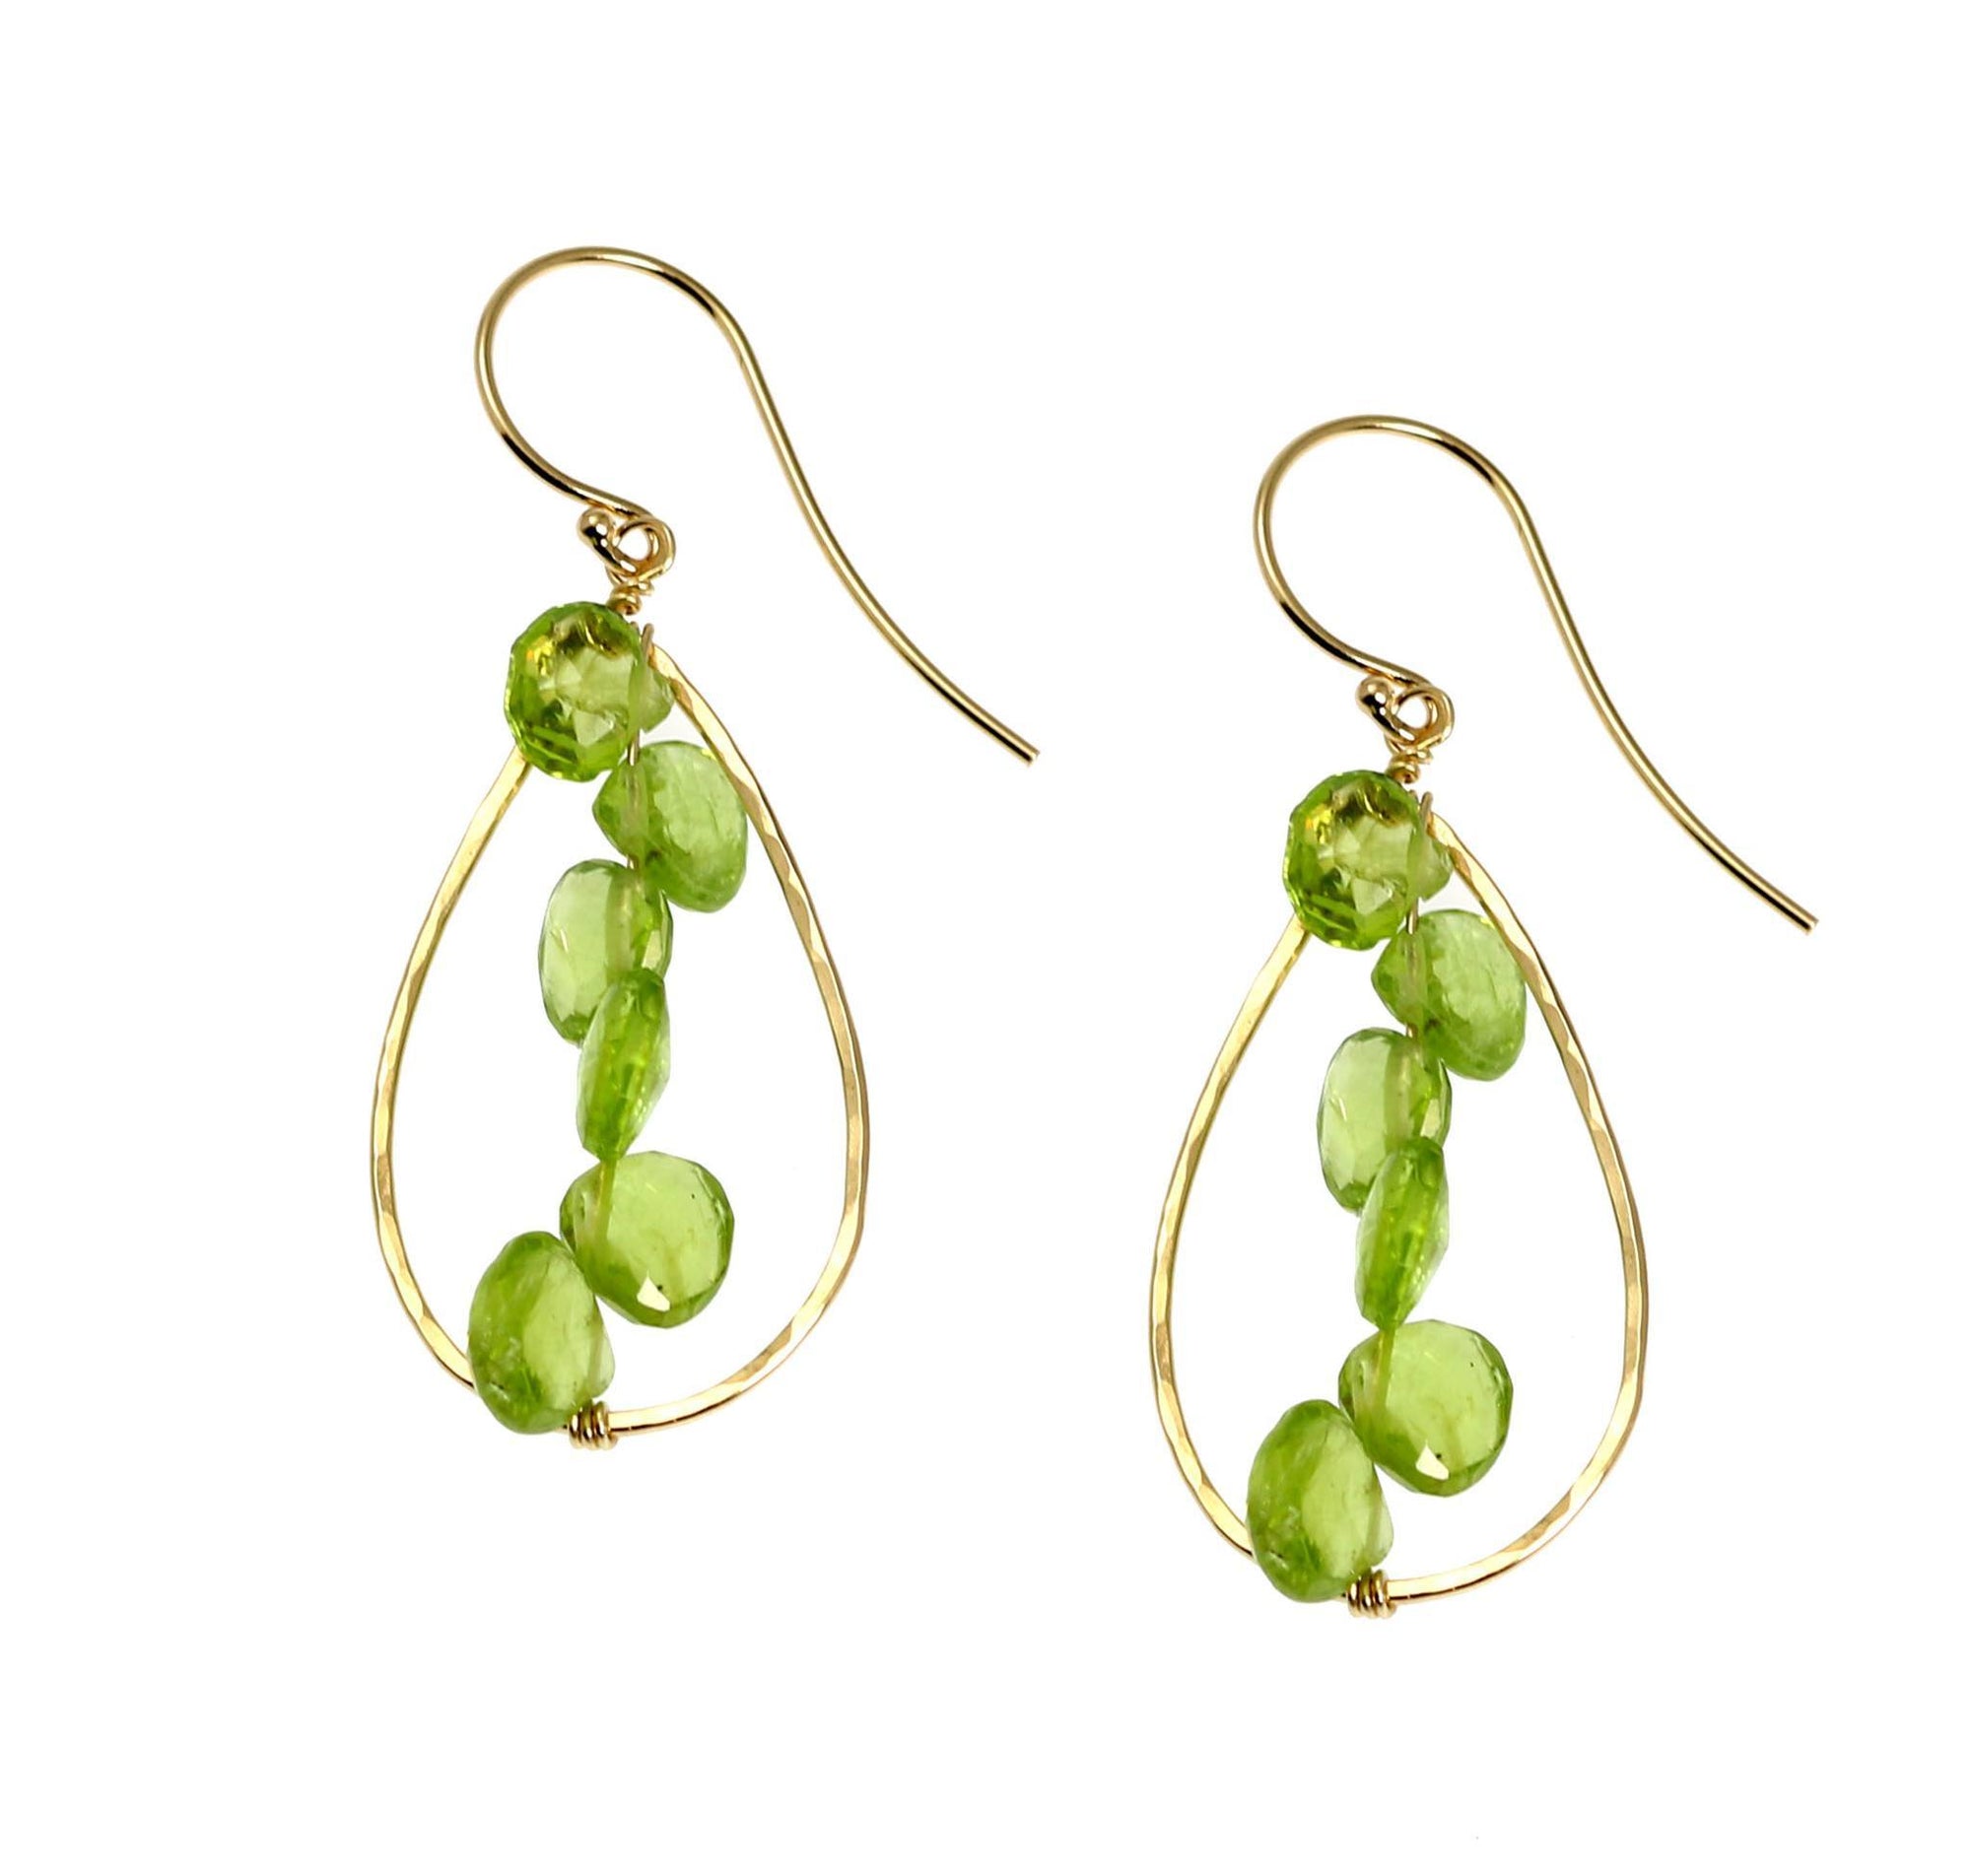 14K Gold Hammered Tear Drop Earrings With Peridot